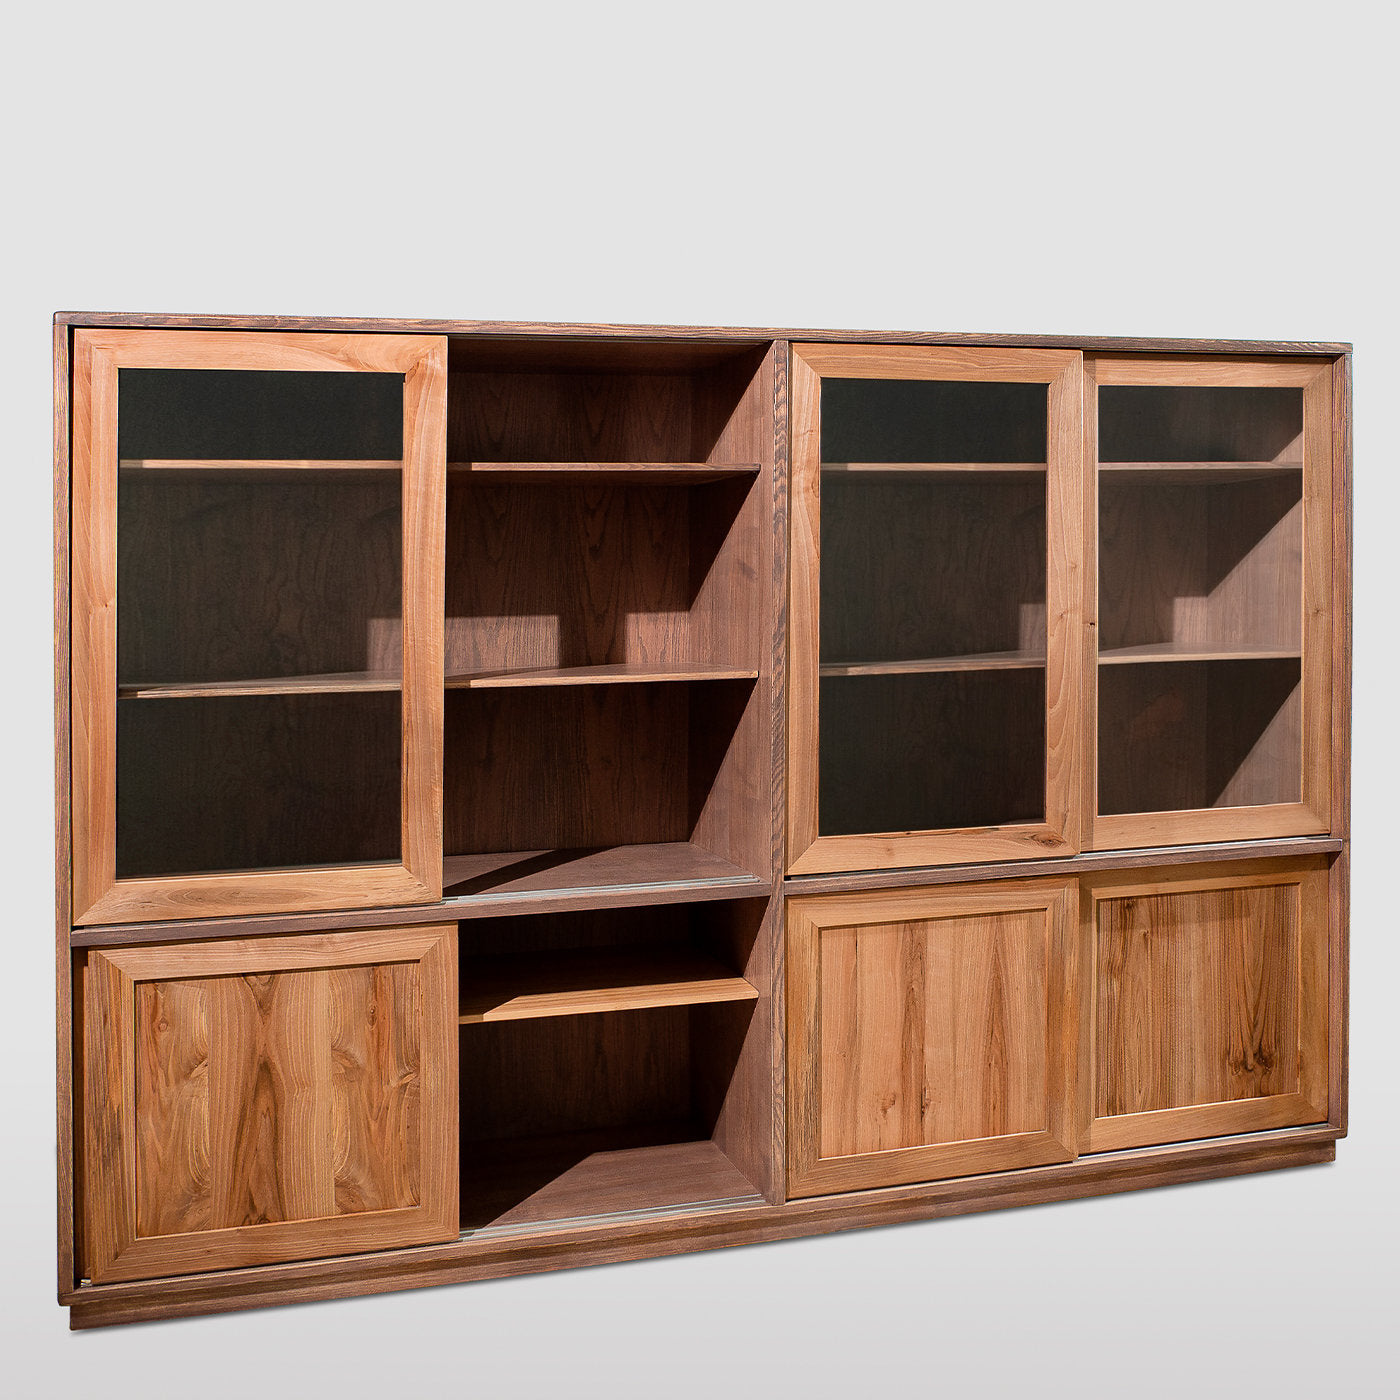 Nordic-Style Modular Bookcase with Sliding Doors - Alternative view 1